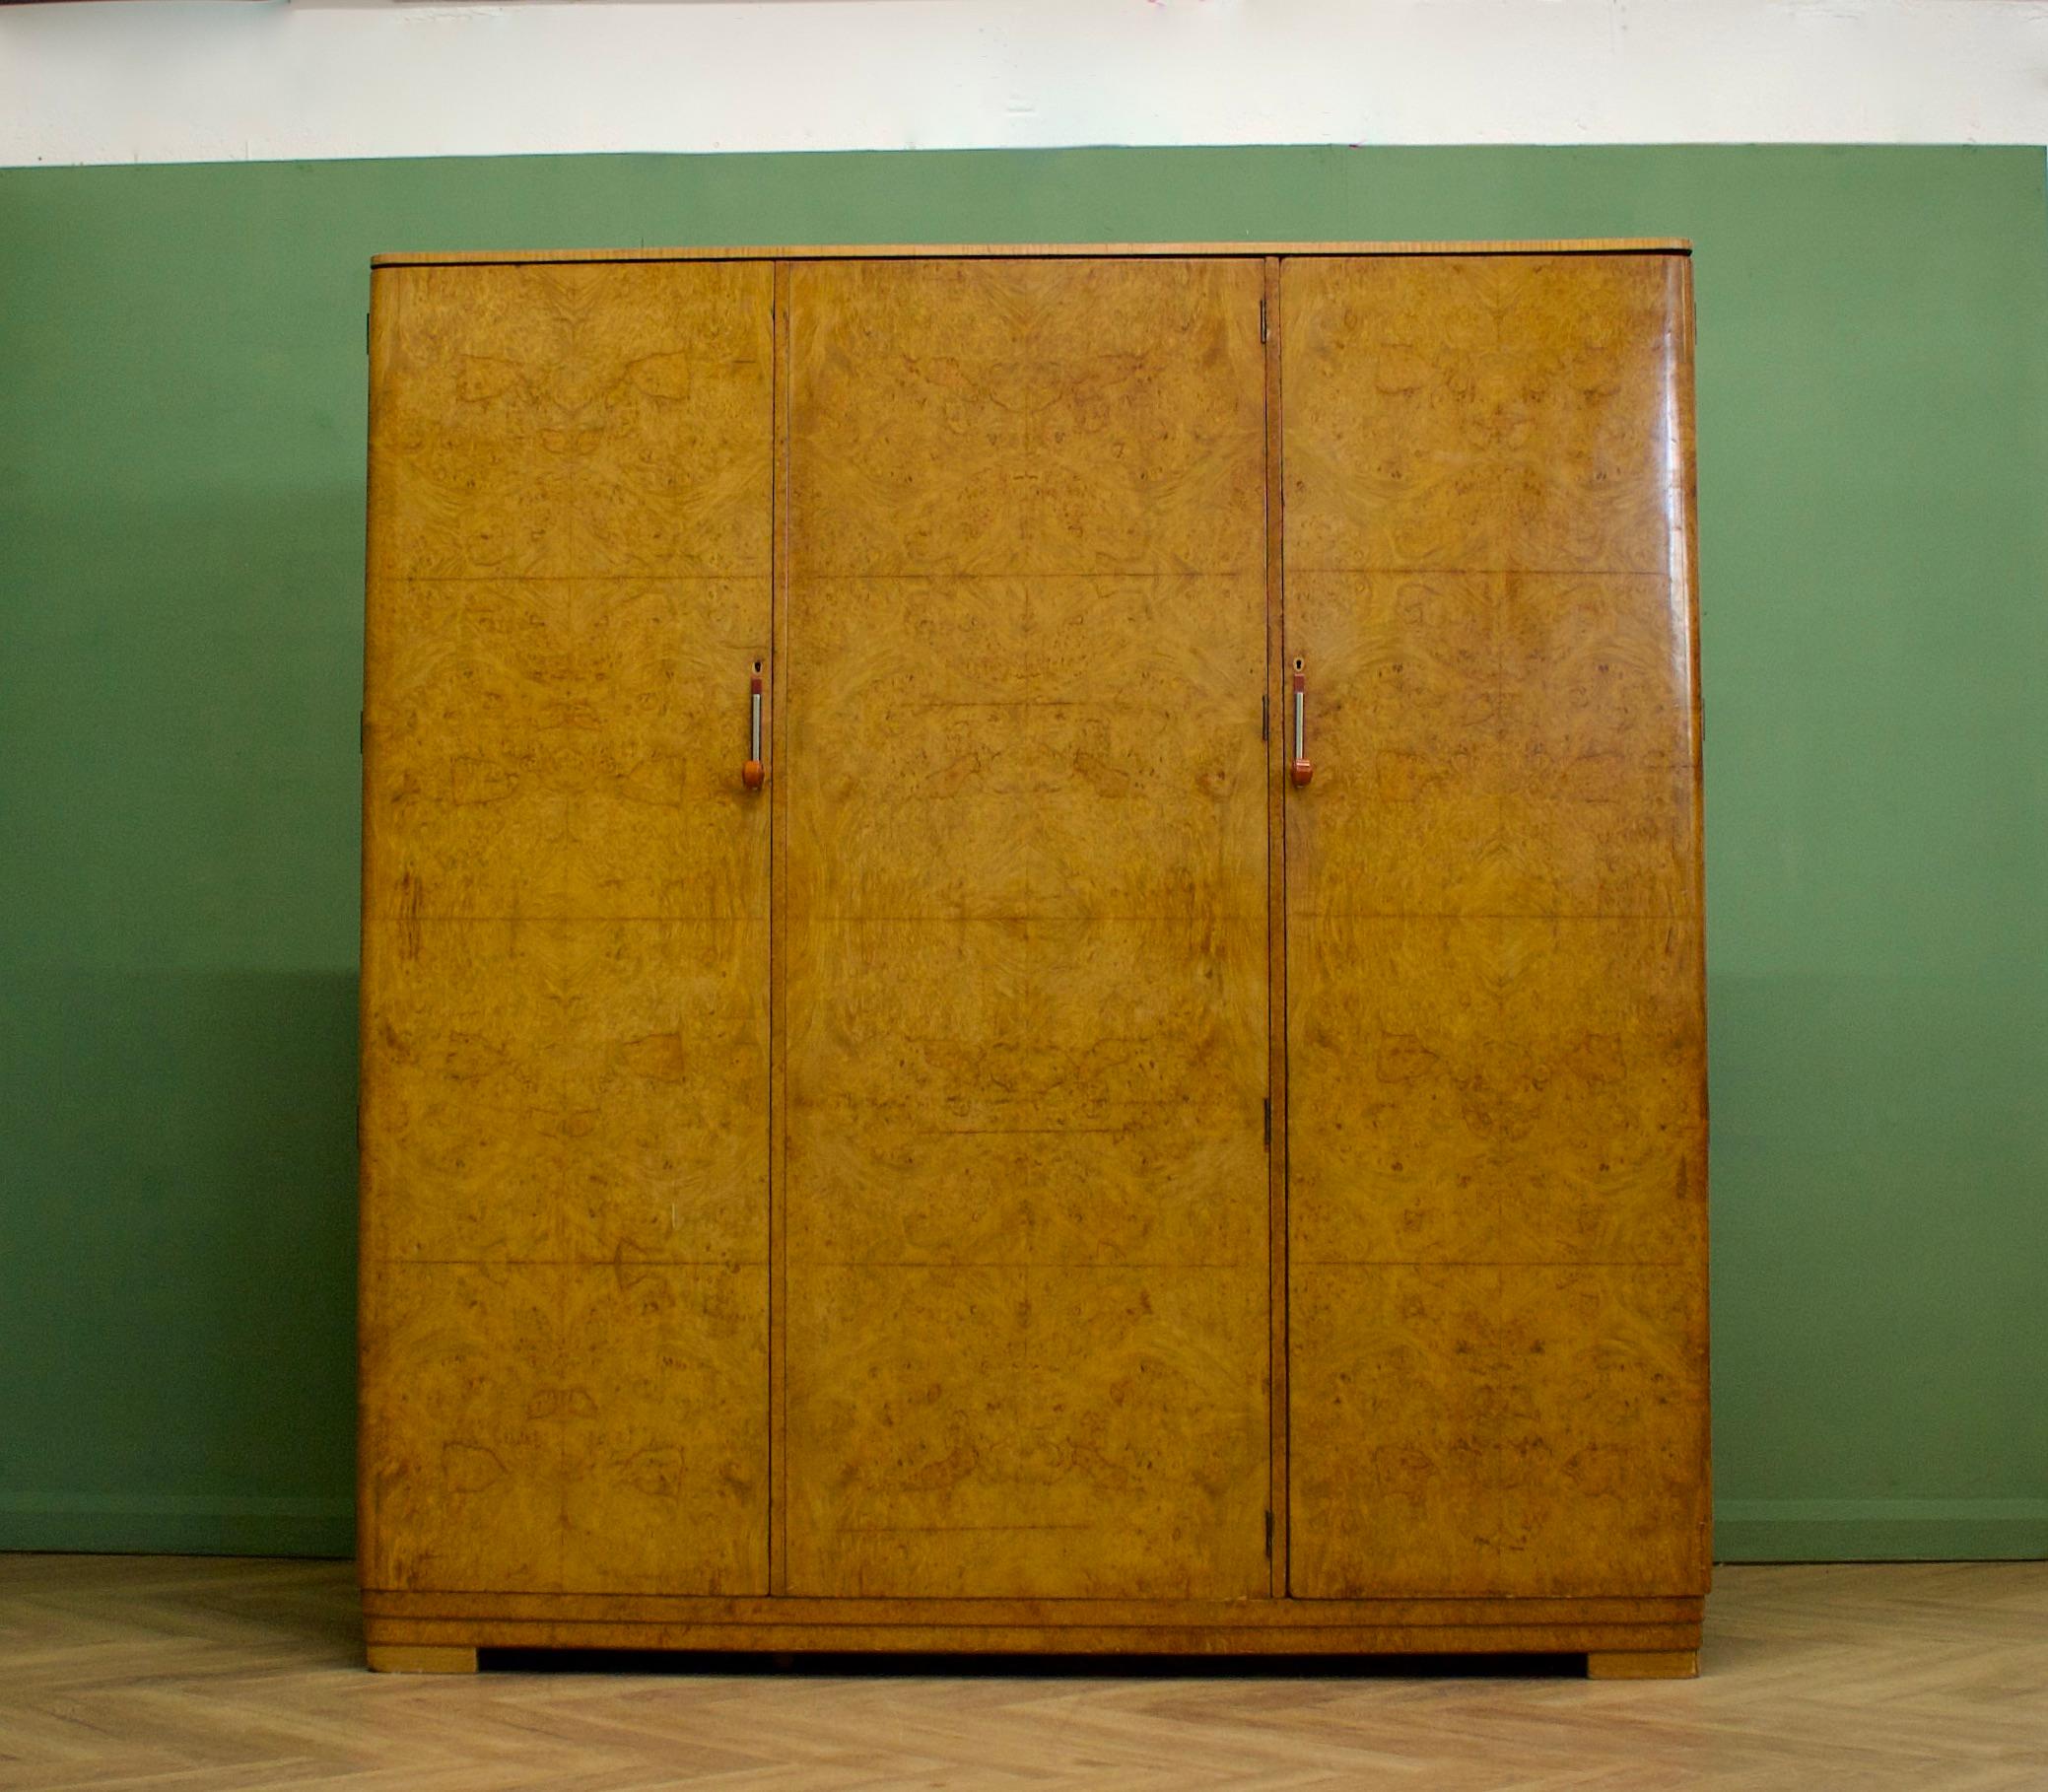 An fine quality Art Deco walnut wardrobe from Maple and Co, circa 1930s
Complete with unique metal, bakelite handles
Beautifully fitted out with a clothes rails to one side  and a shelves and drawers to the other